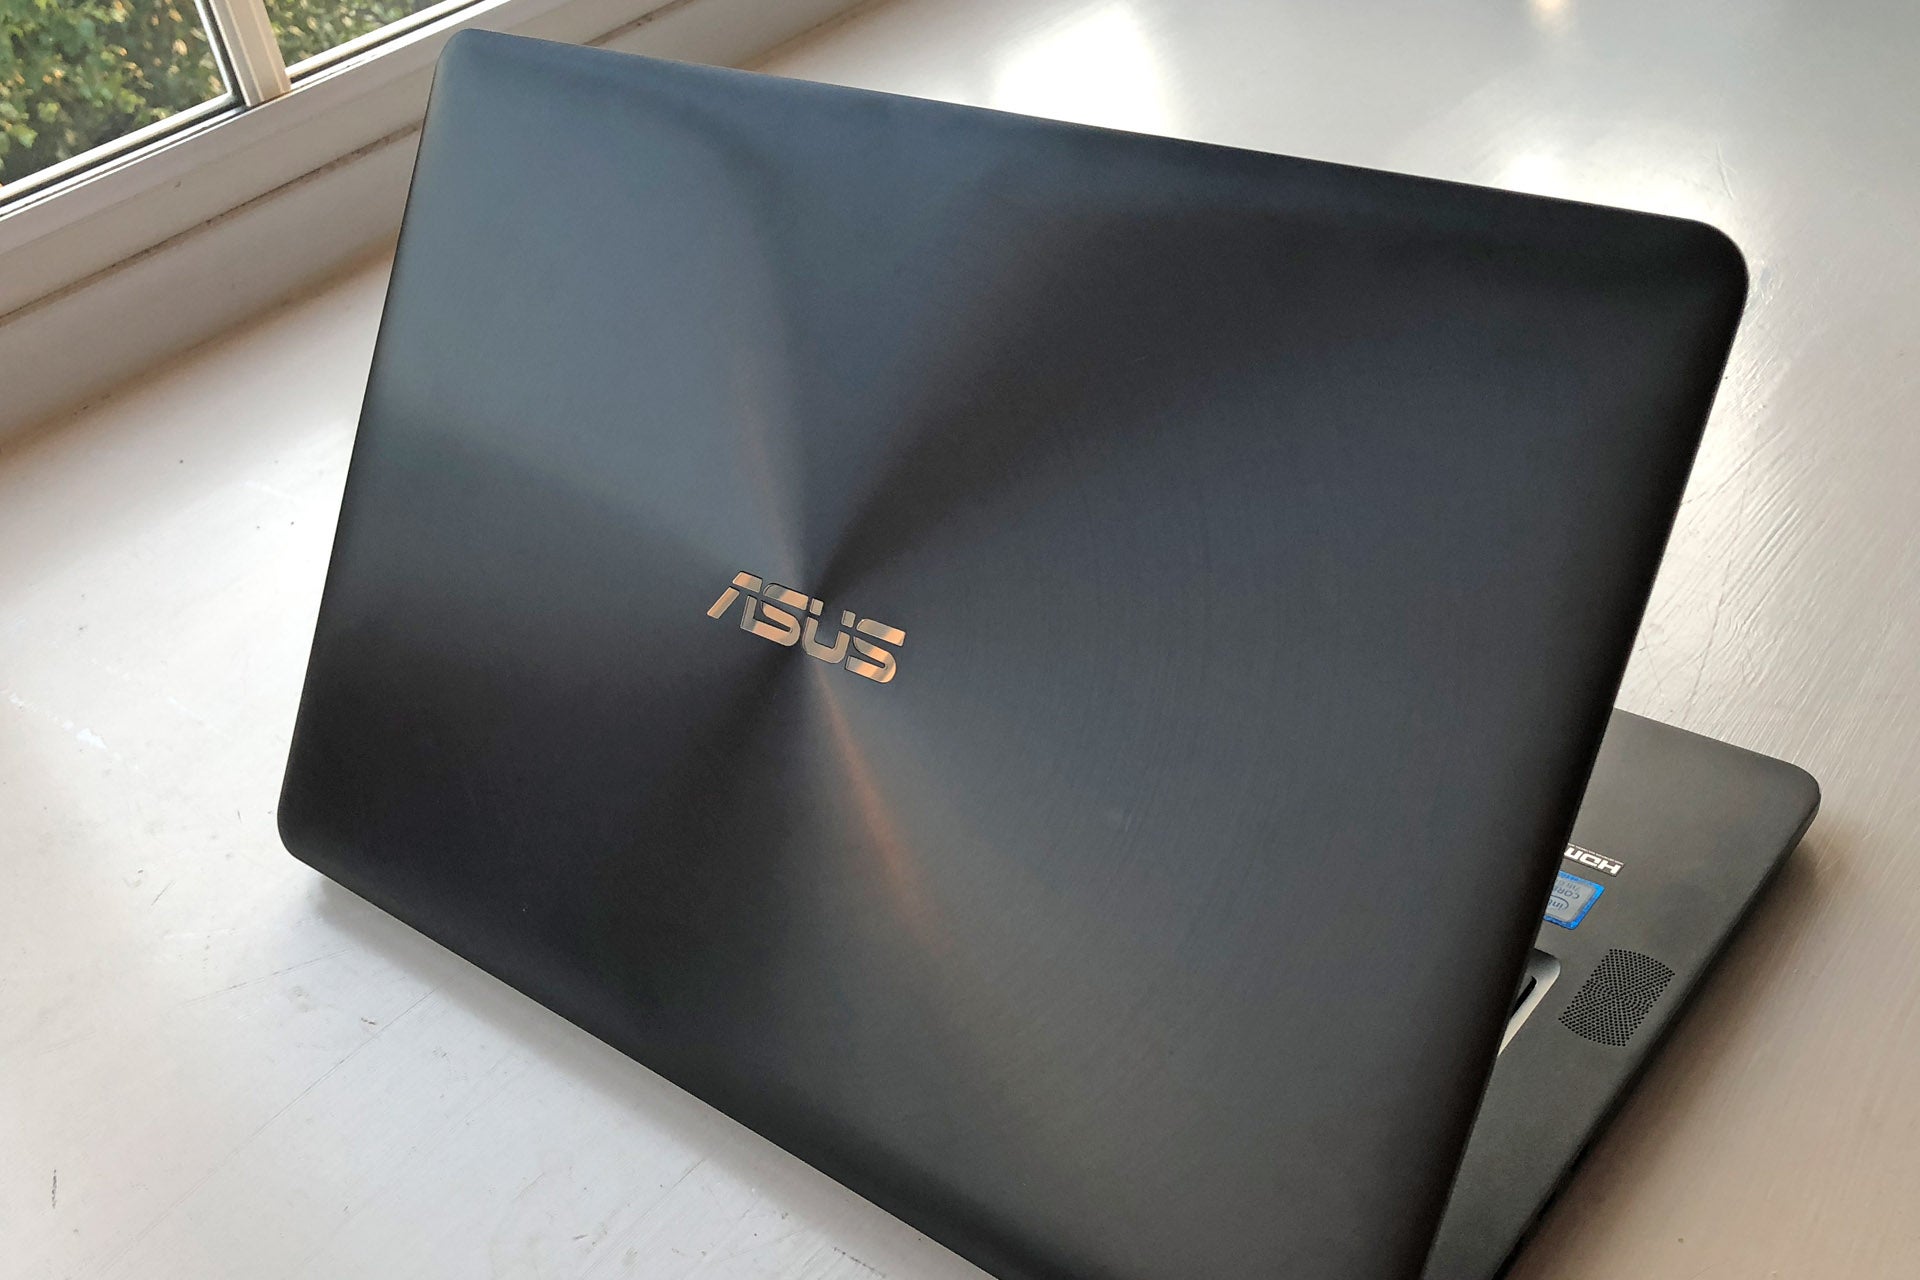 Asus ZenBook Pro UX550VD Review | Trusted Reviews